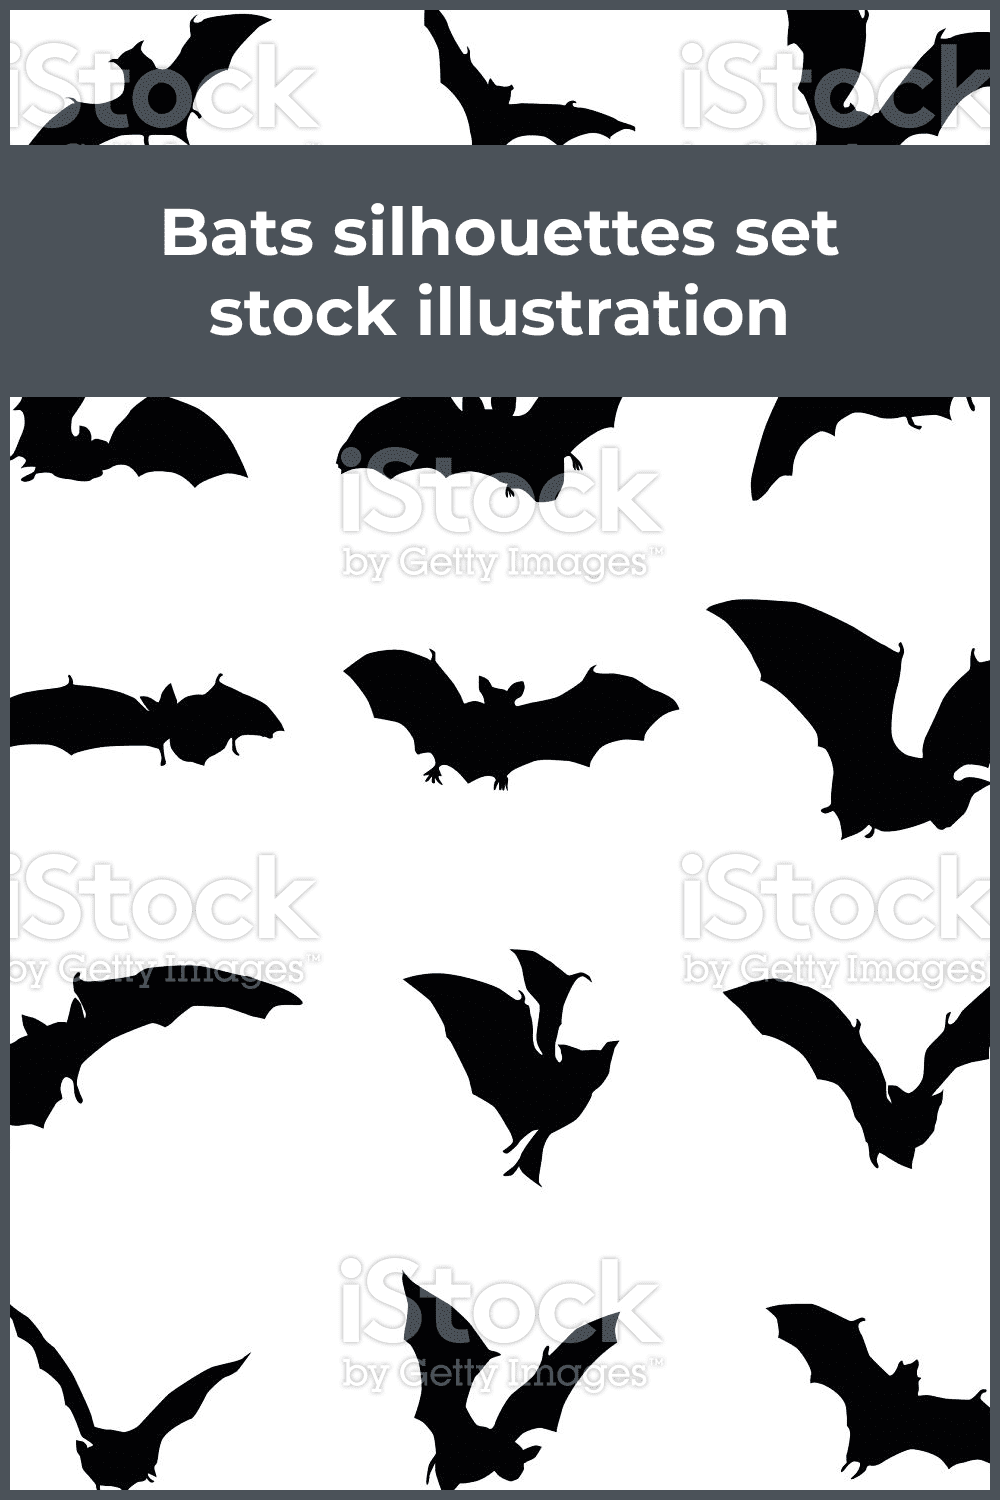 Black bats with different wing-beats.